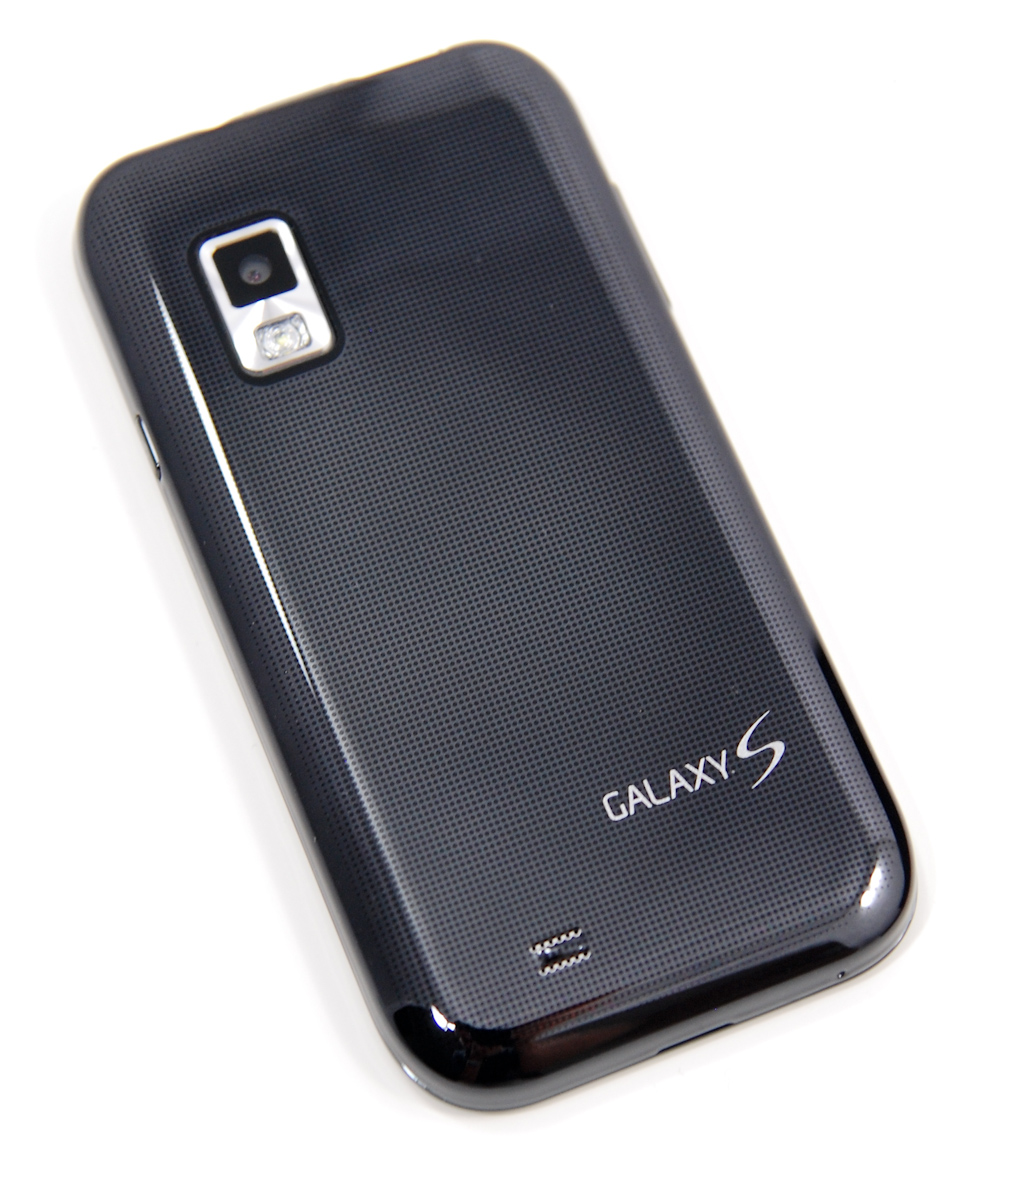 Samsung Review: Galaxy S Smartphone